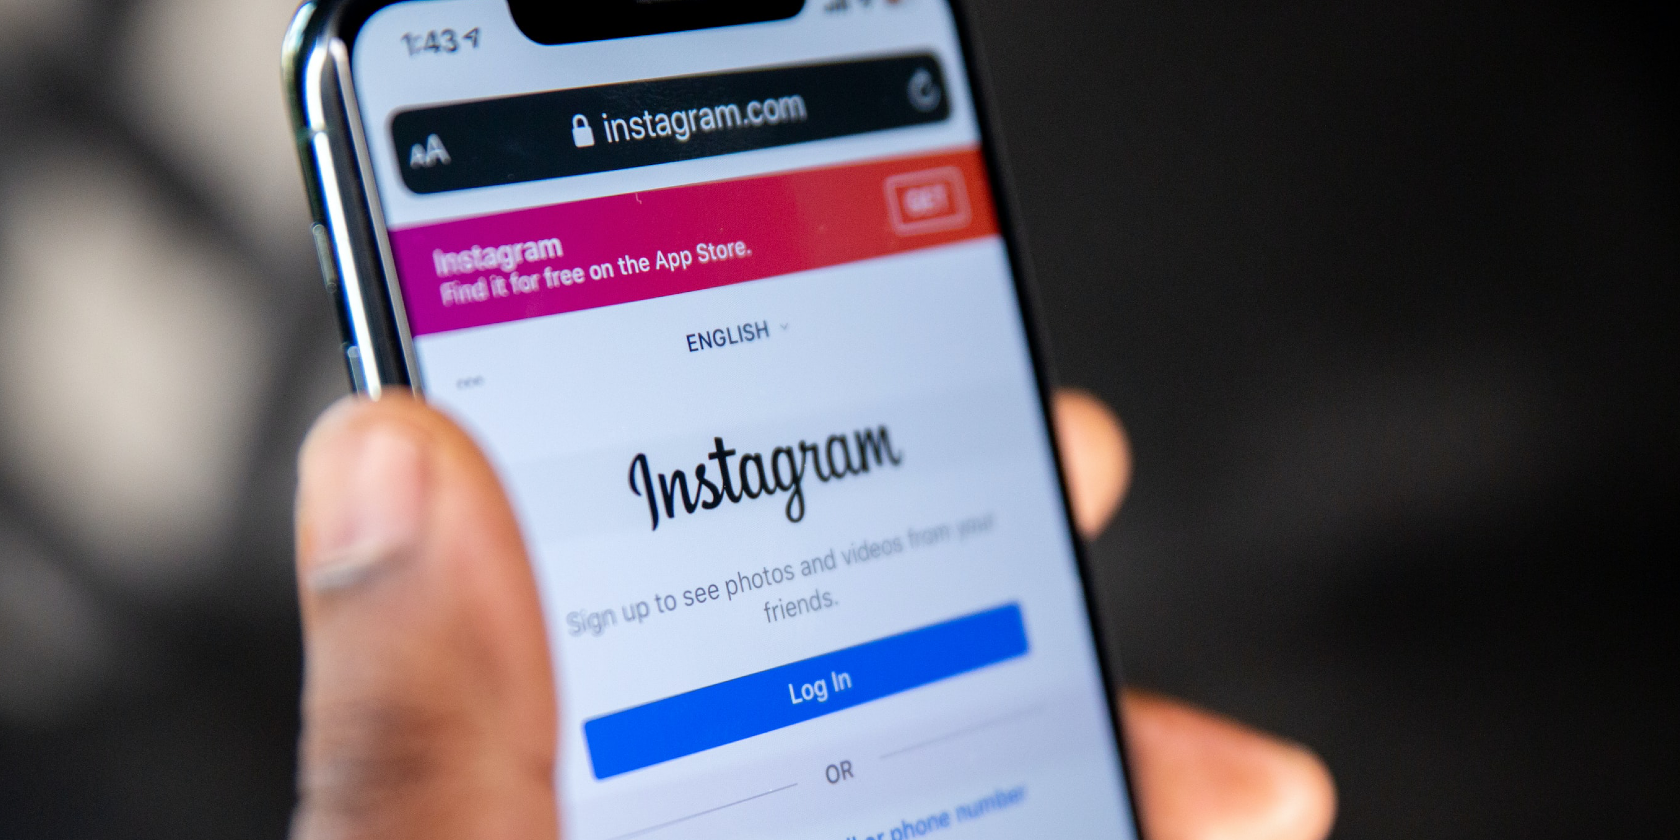 How to Change Your Email Address on Instagram